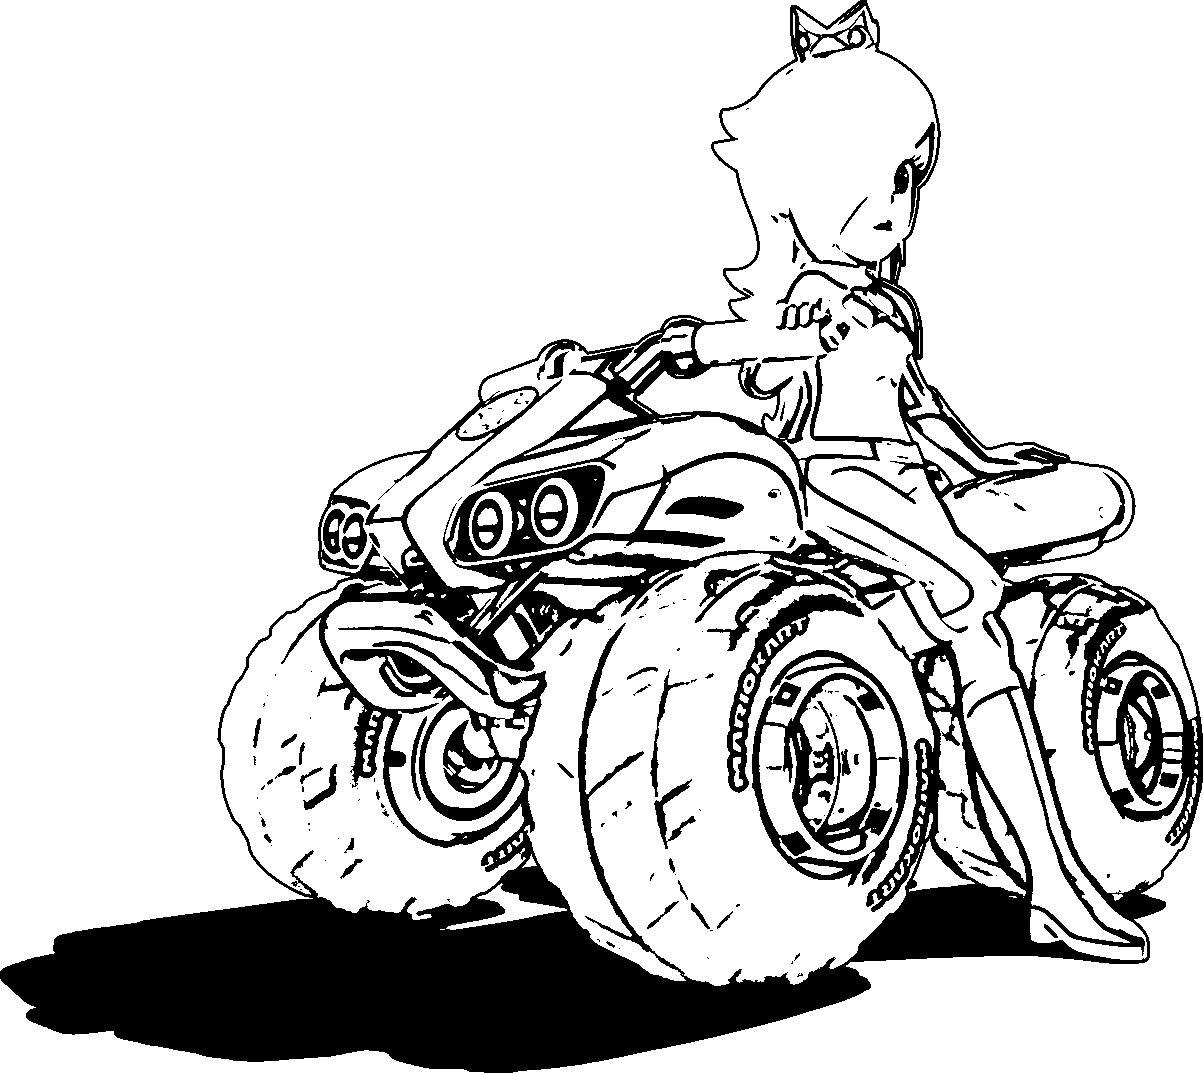 Mario Kart 8 Colouring Pages - High Quality Coloring Pages